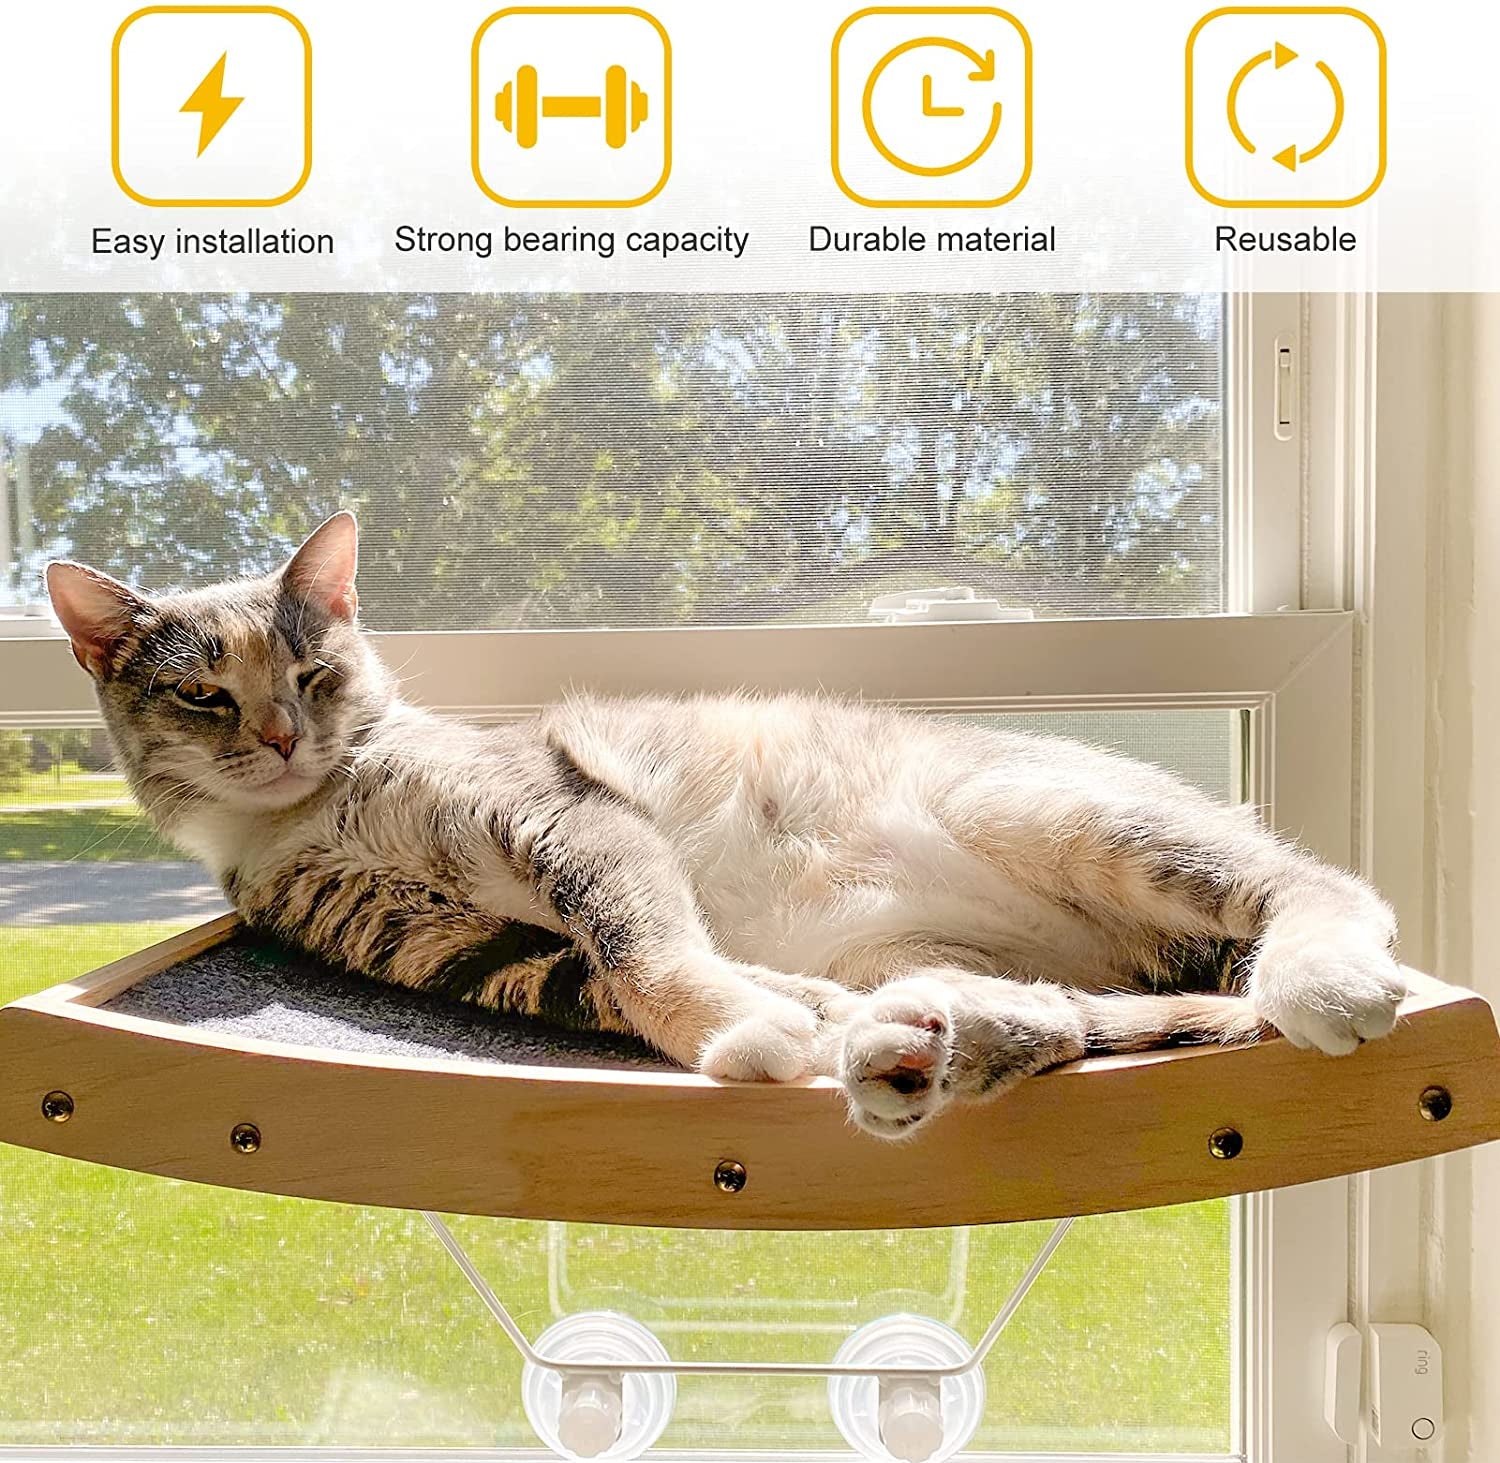 Cat Window Perch, Cat Hammock Window Seat with Strong Suction Cups, Window Mounted Cat Bed for Indoor Cats, Weighted up to 40Lb, Safety, Space Saving, Easy to Assemble